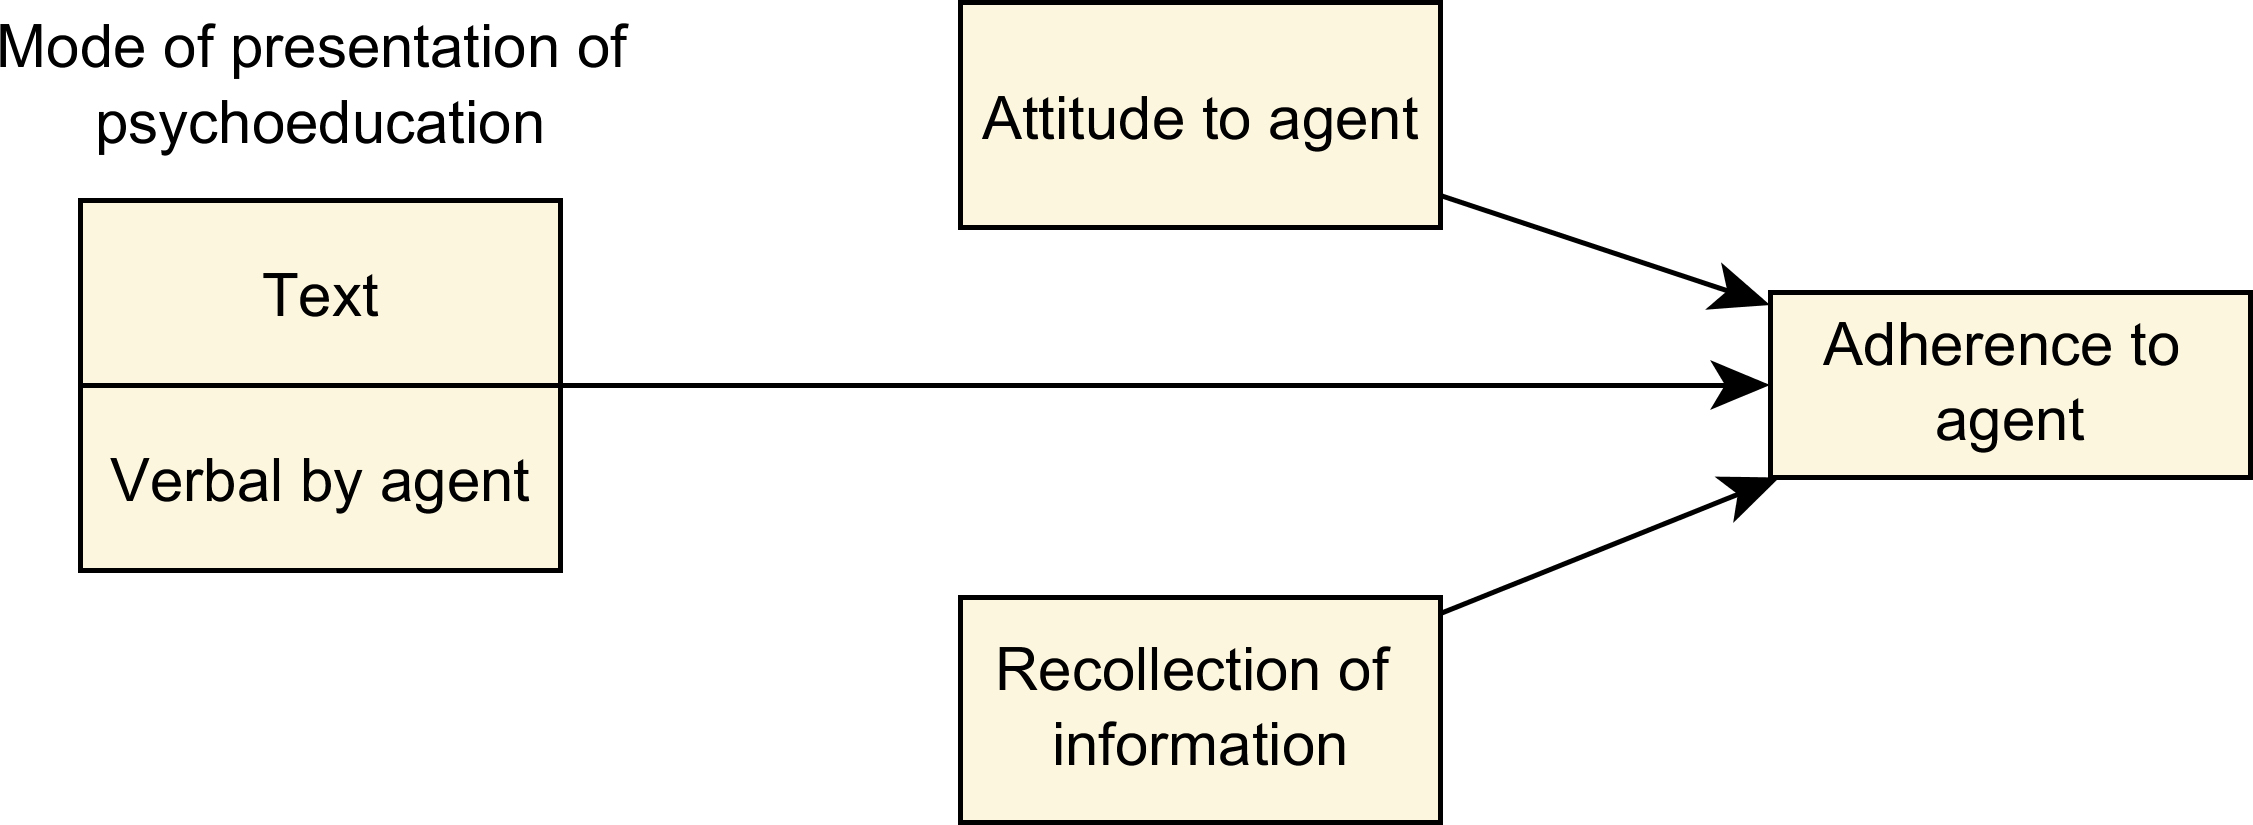 Model showing the result that presentation mode effects adherence to the agent, and attitude to the agent and recollection are extraneous variables.